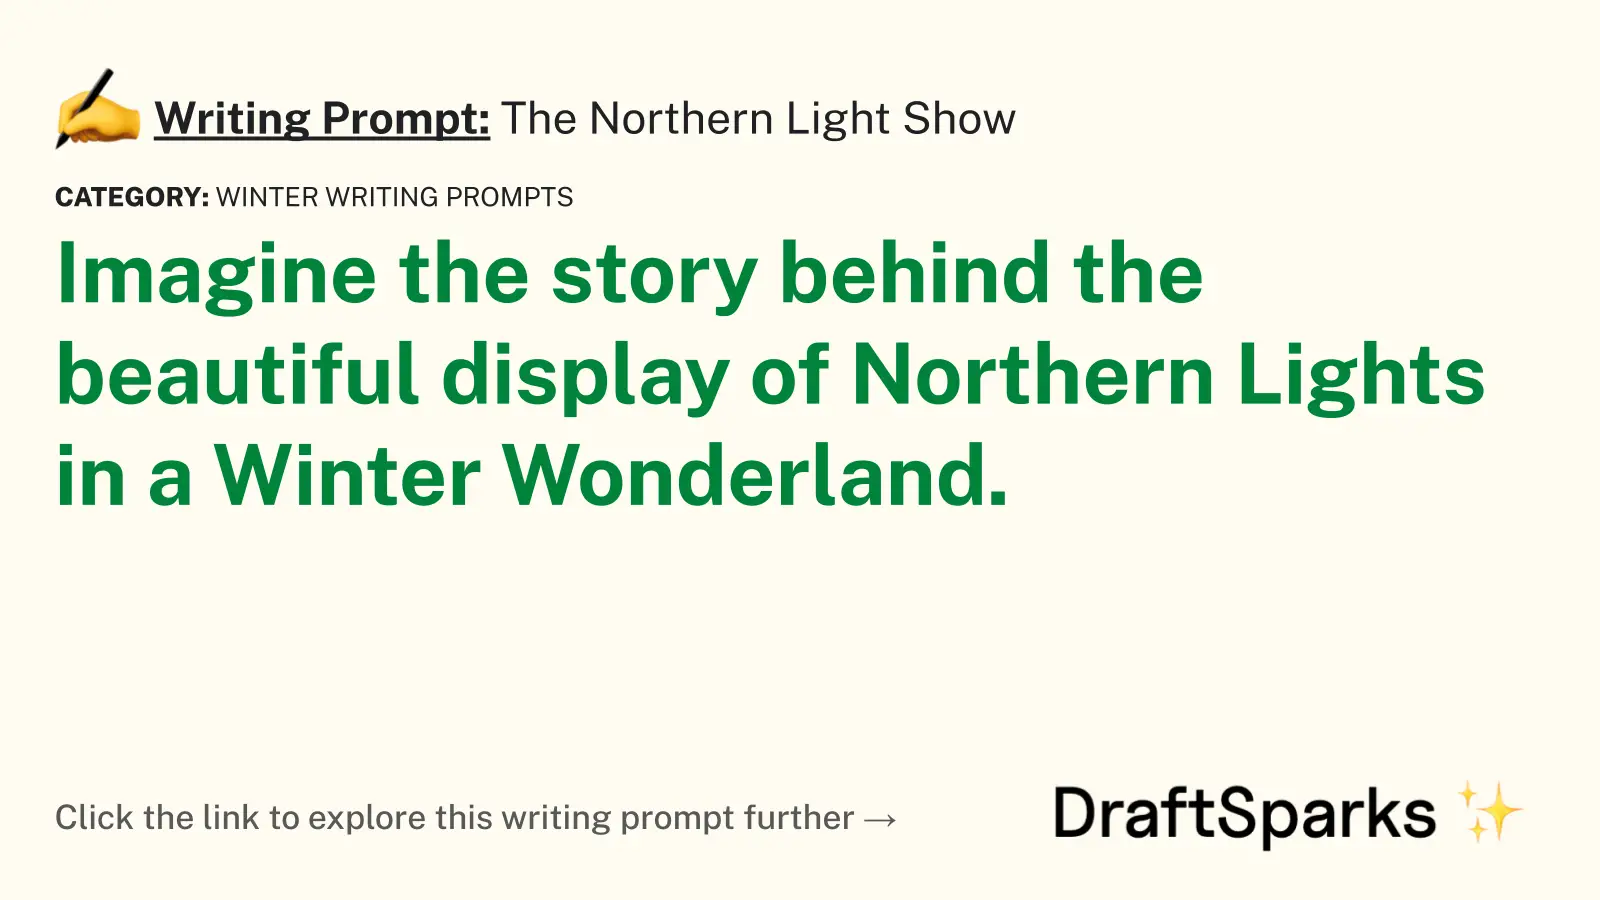 The Northern Light Show